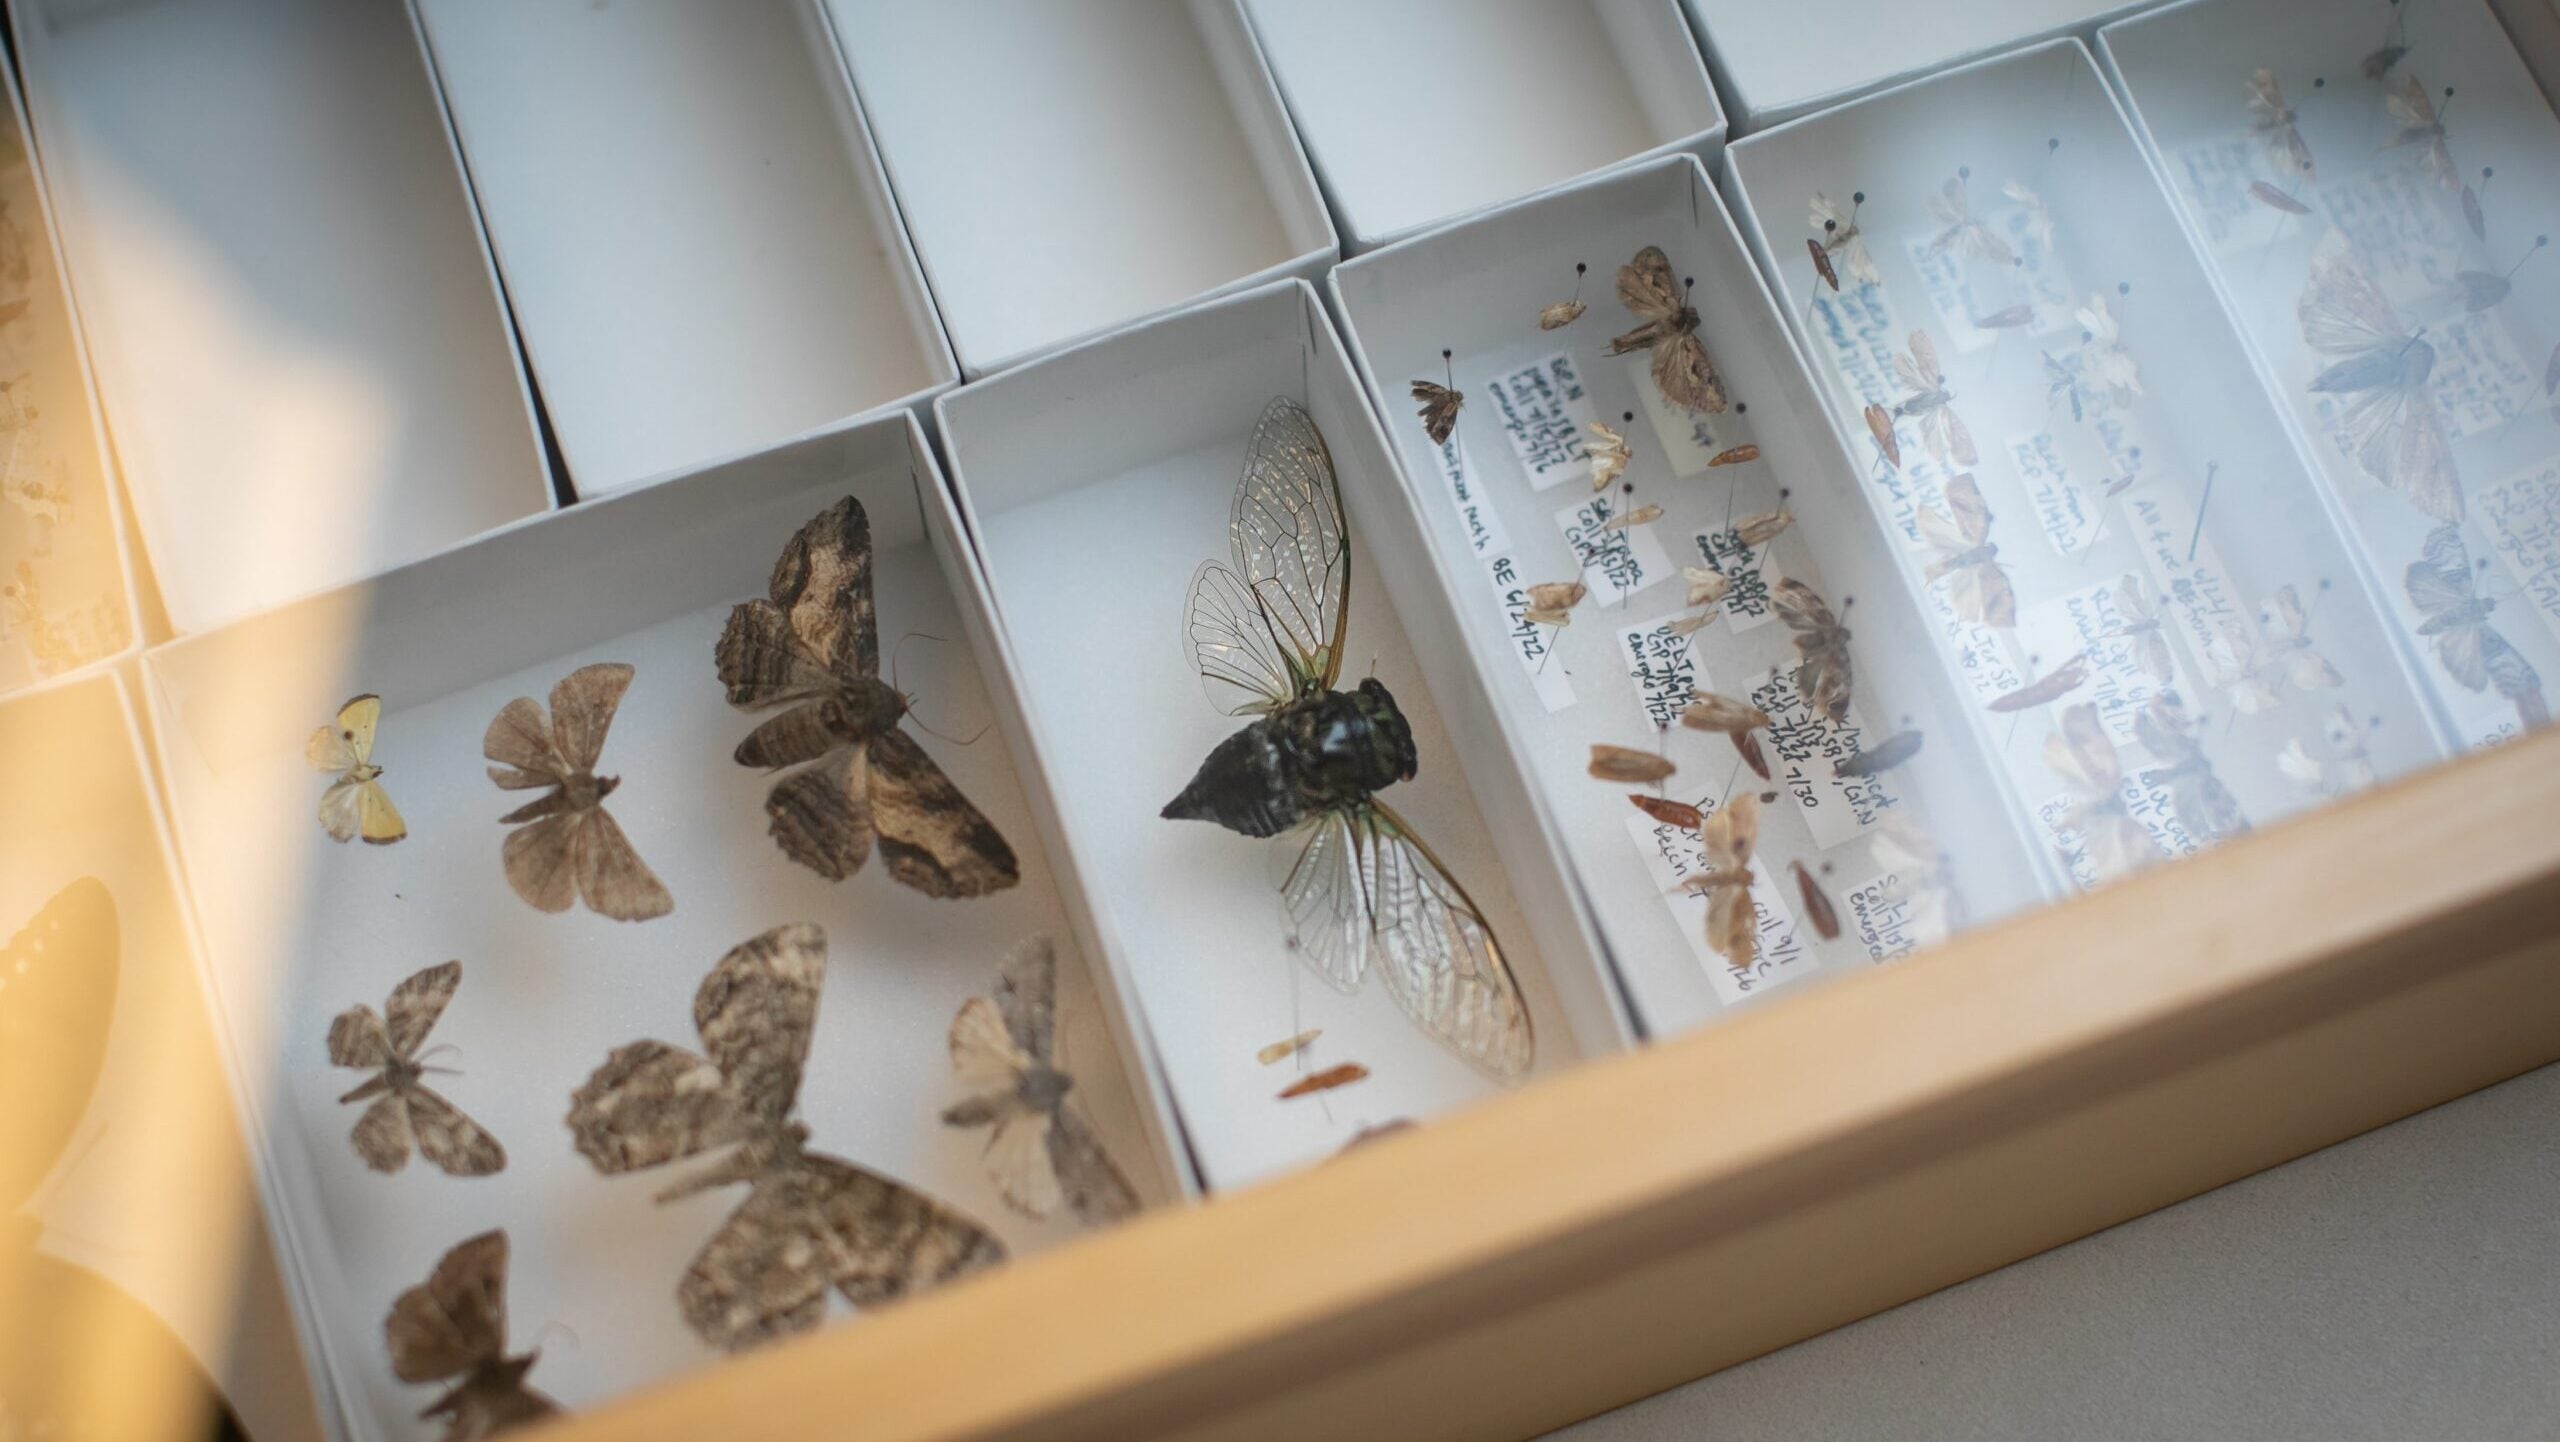 A collection of winged insects encased under glass.